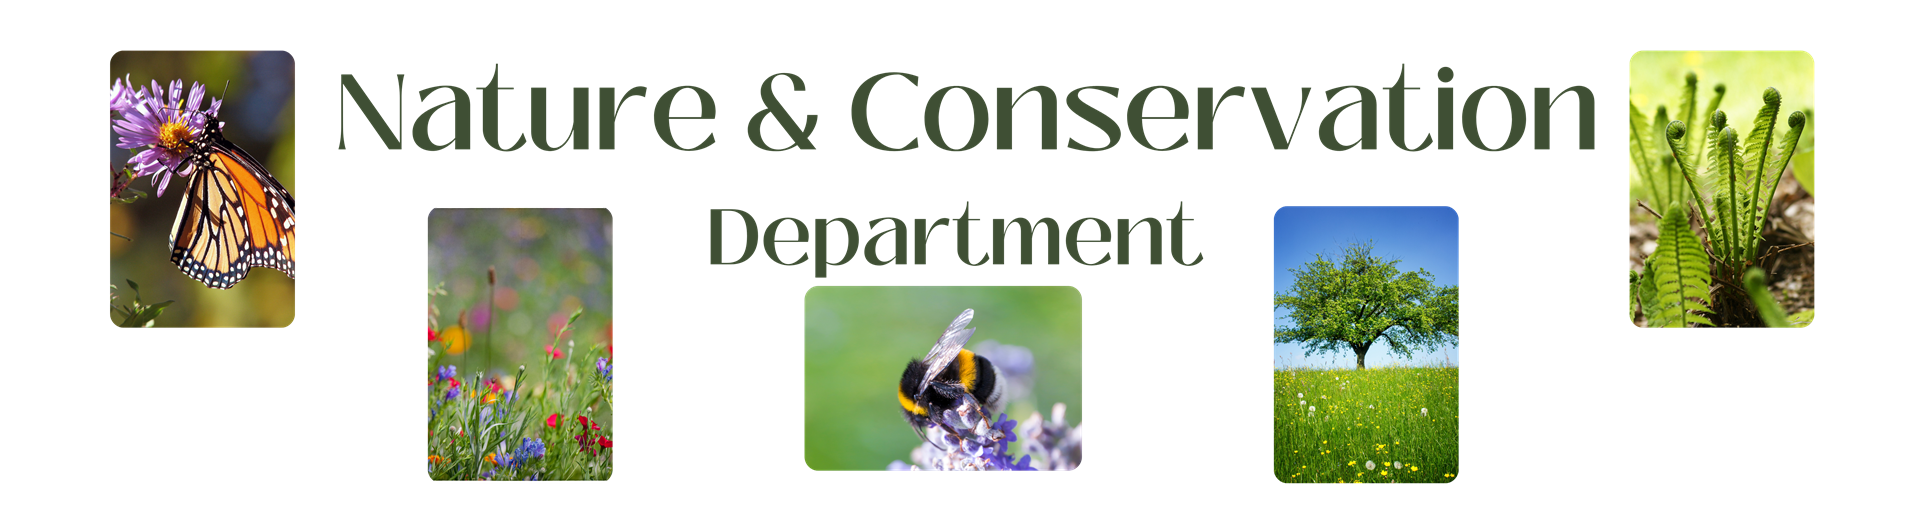 Nature and Conservation Department